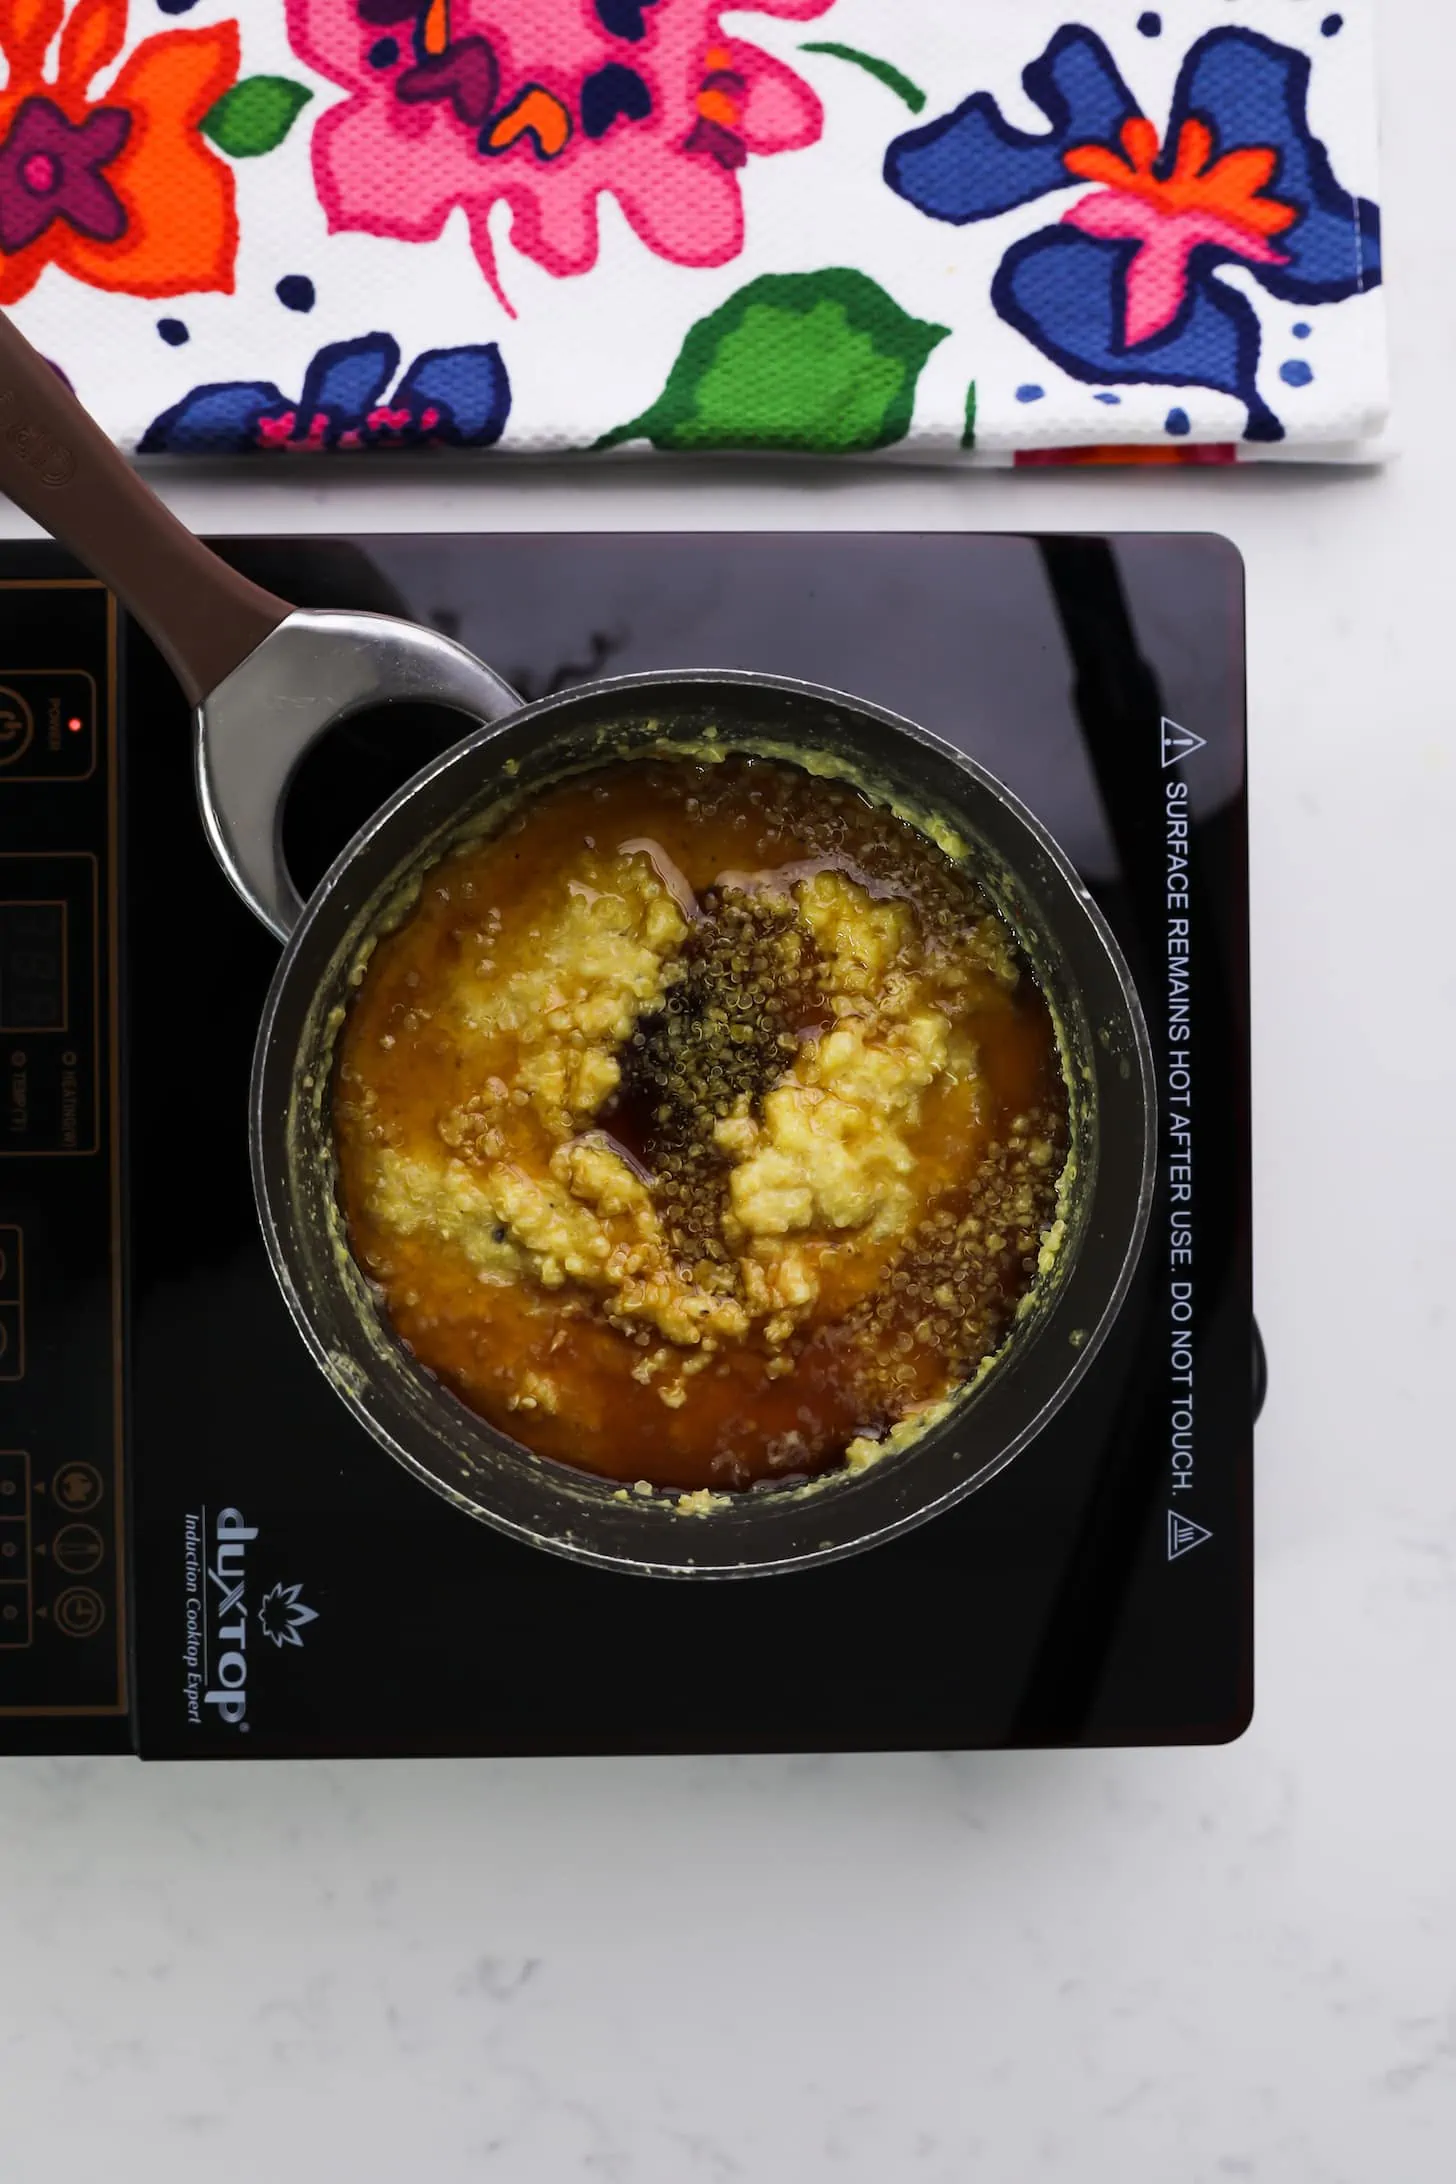 a saucepan with a mixture of yellow and brown liquid on a mobile stovetop.